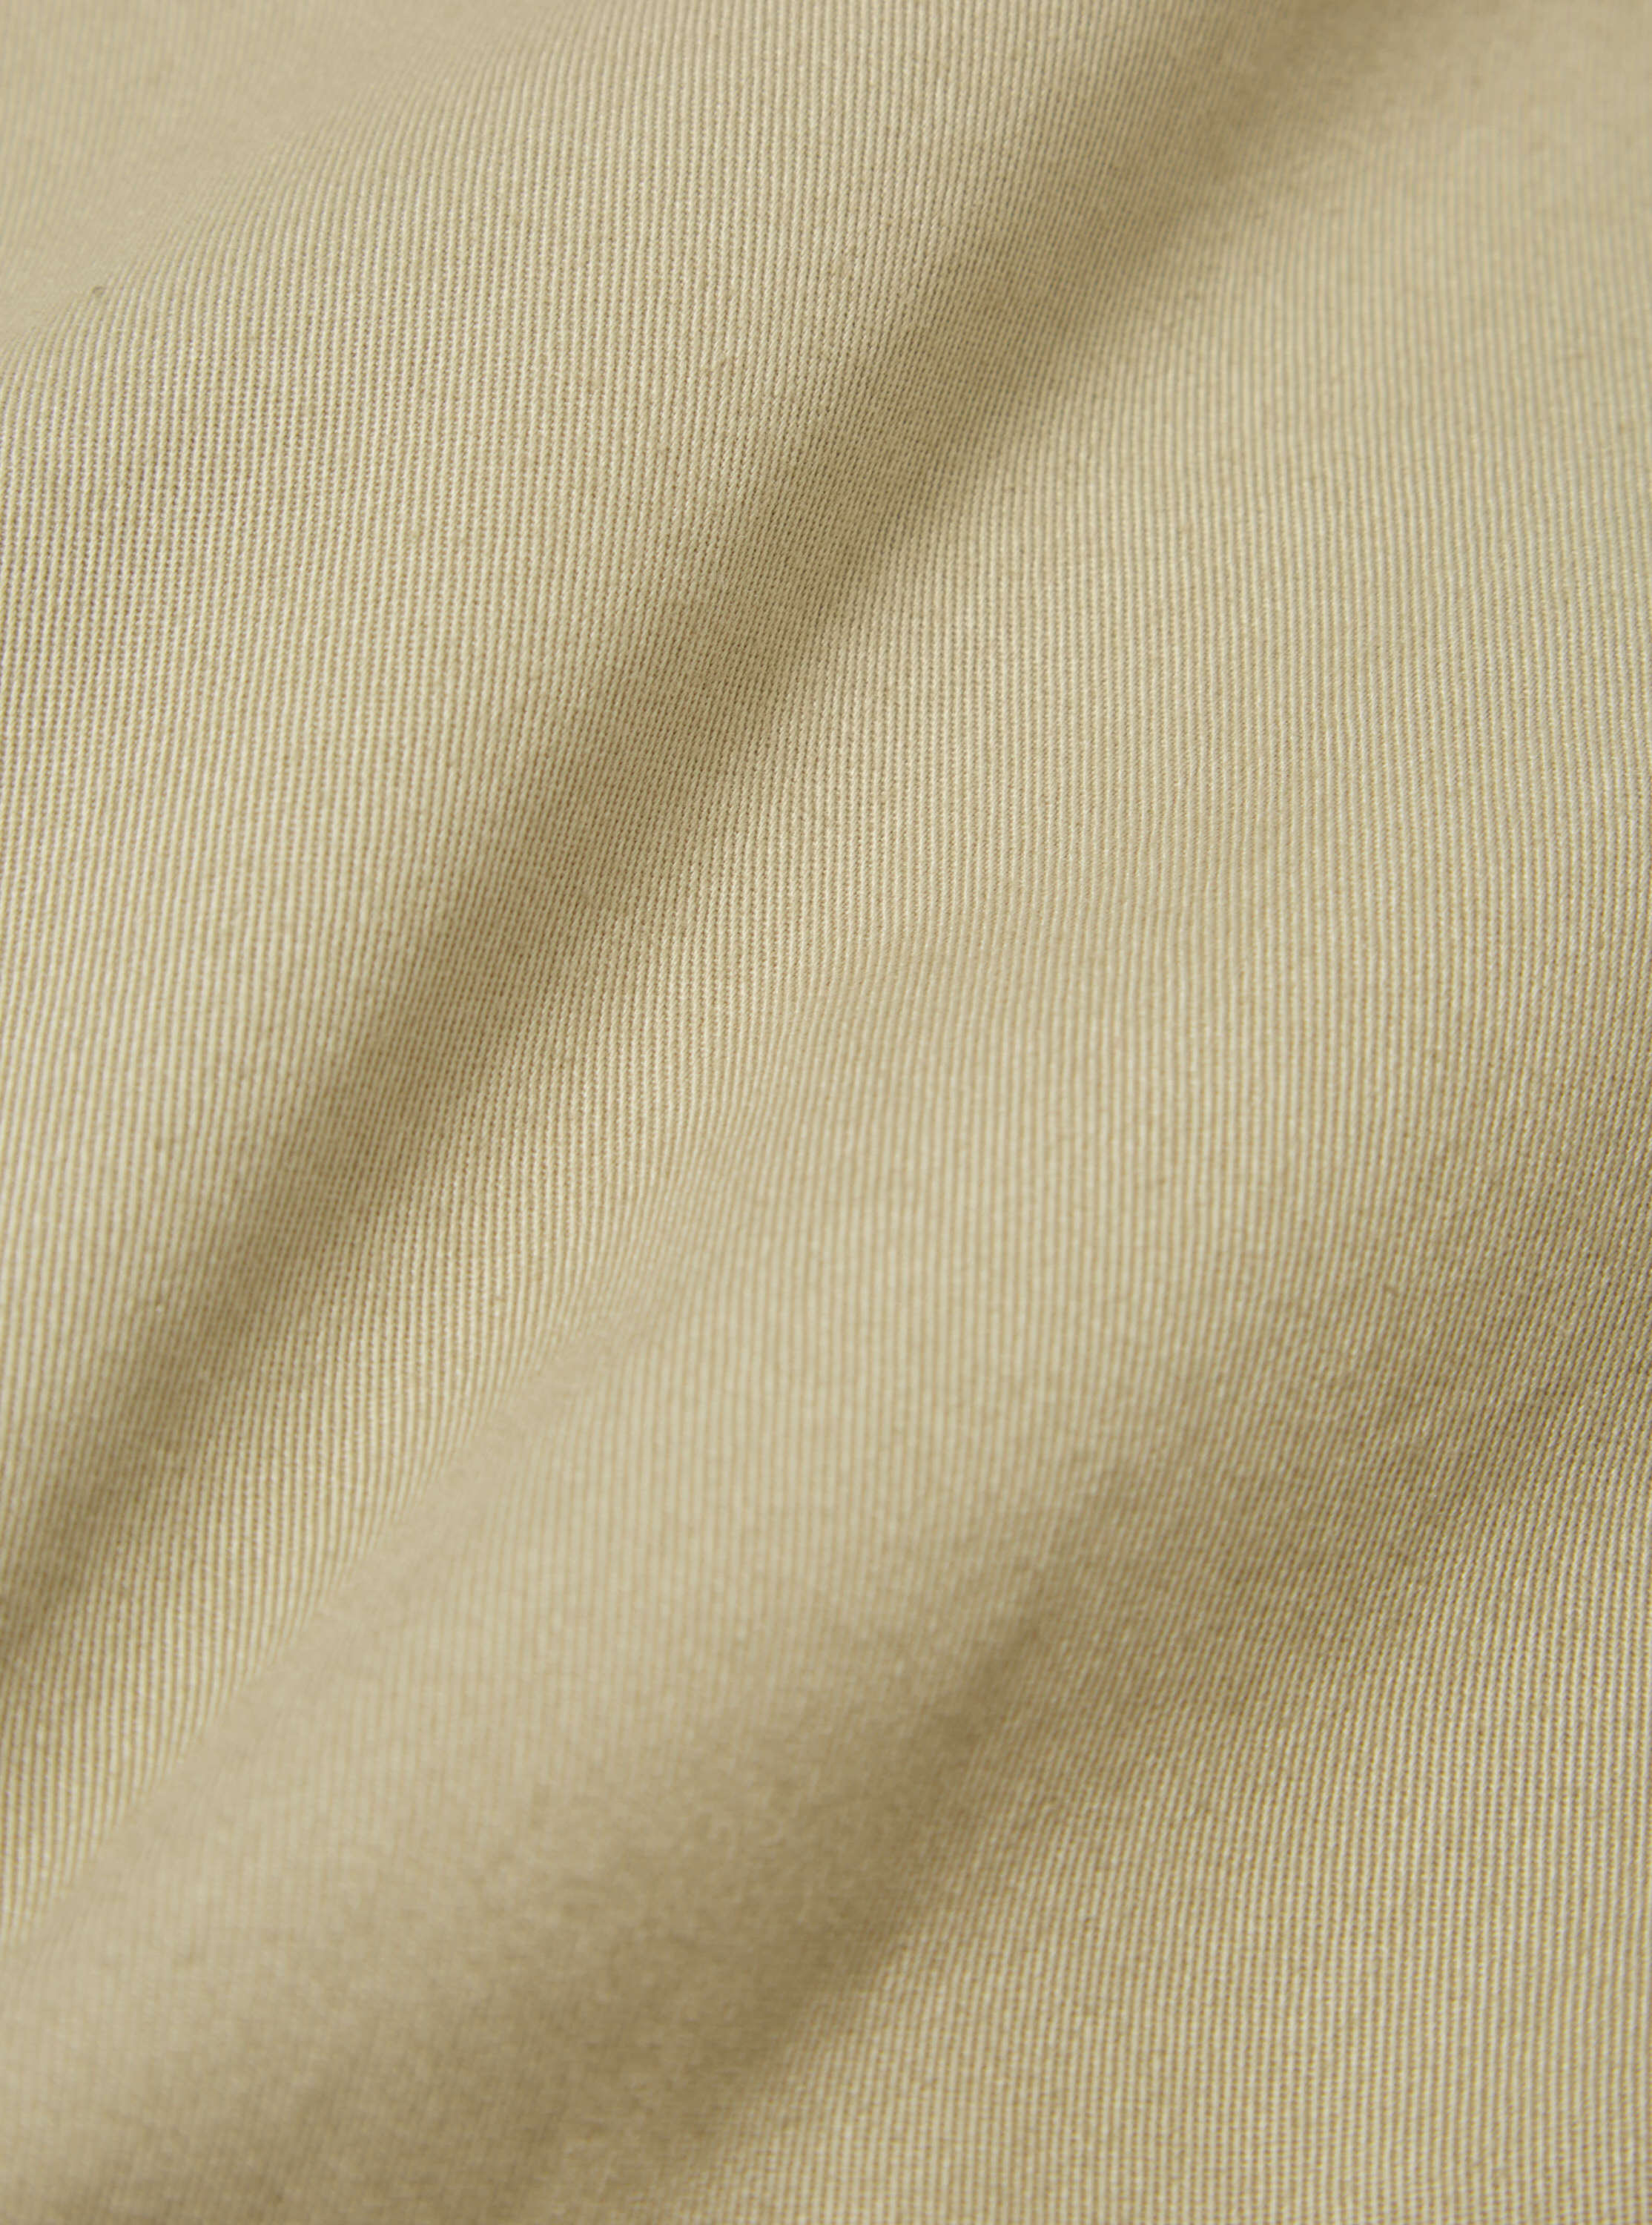 Universal Works Pleated Track Short in Stone Twill